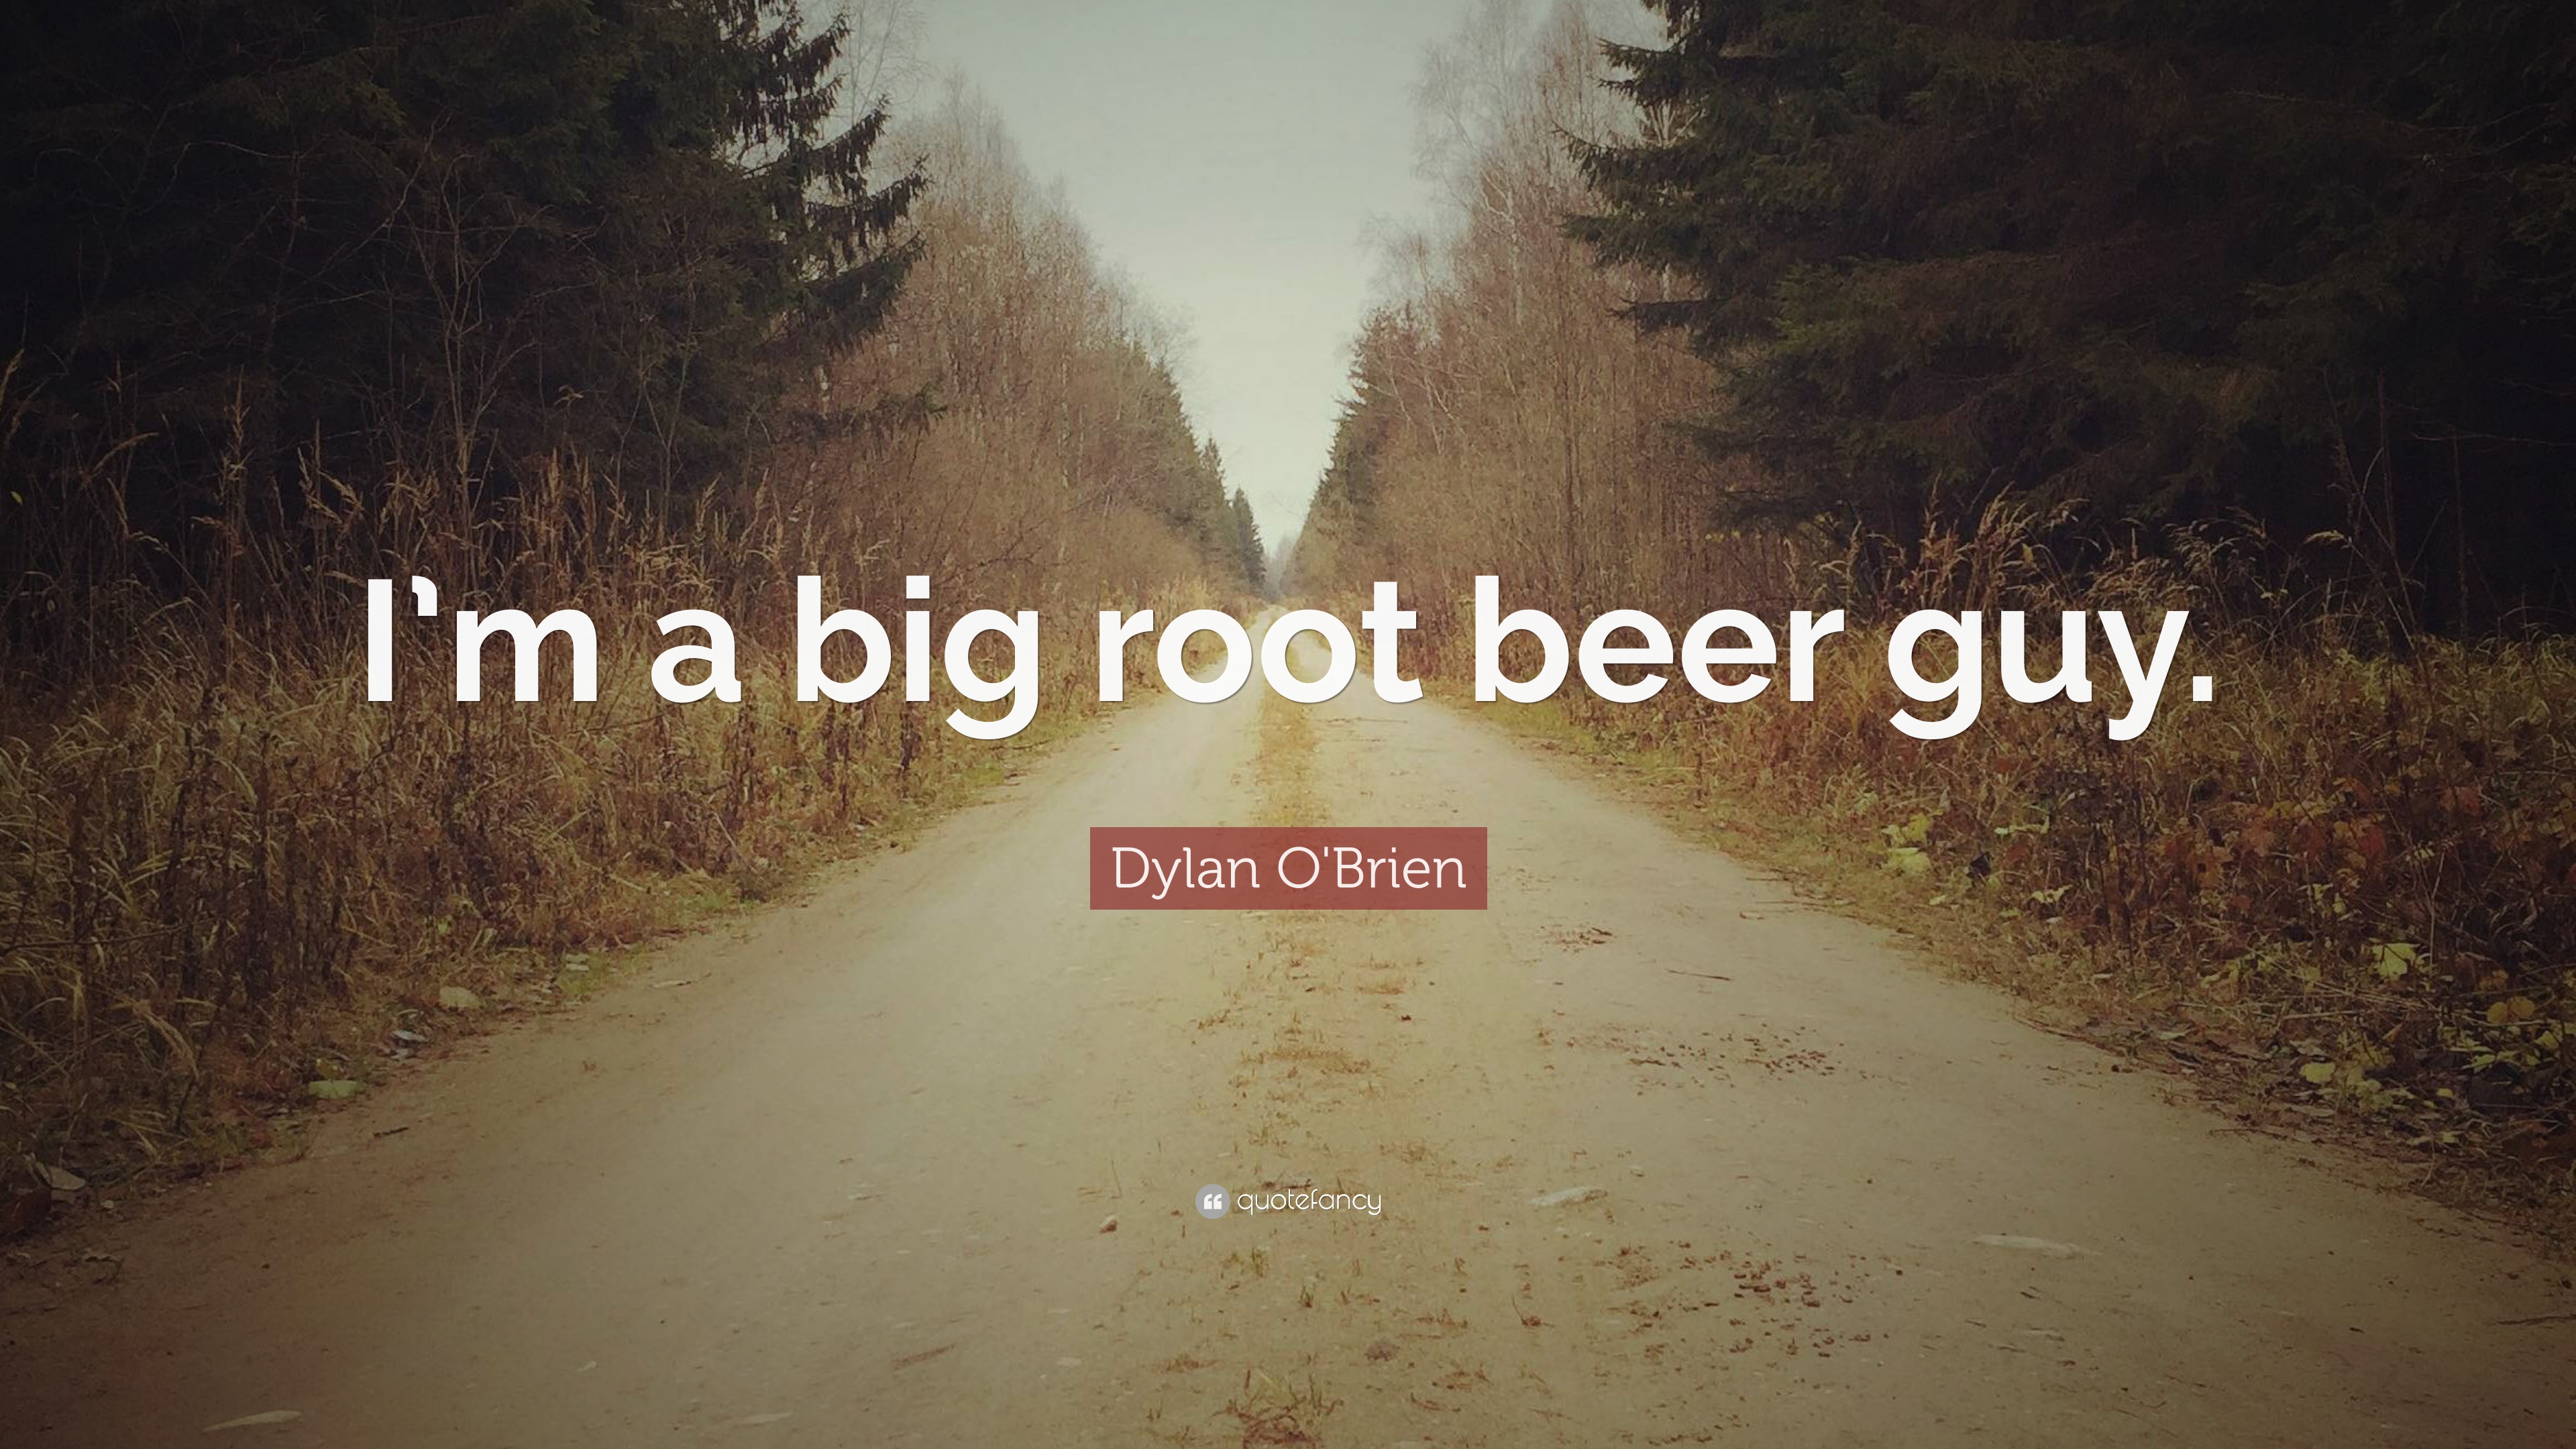 Dylan O'Brien Quote: “I'm a big root beer guy.” 12